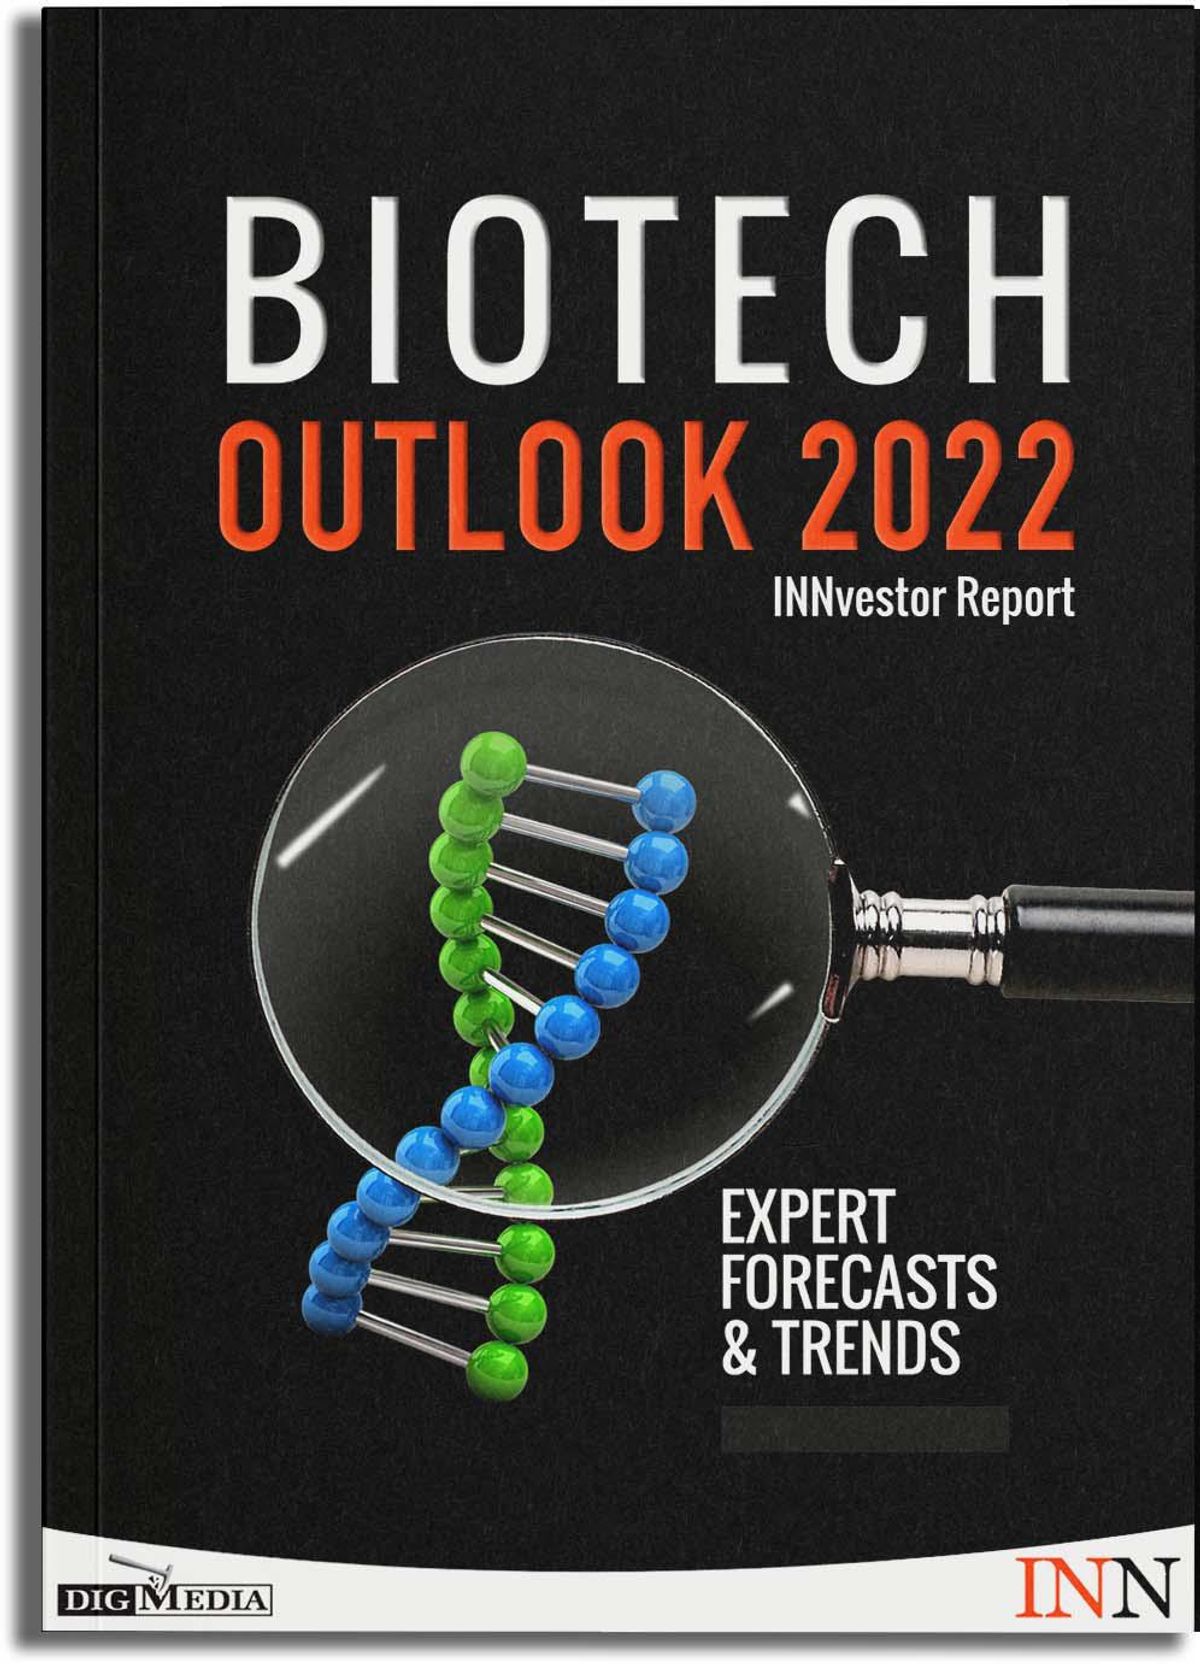 NEW! Download Your FREE 2022 Biotech Outlook Report.